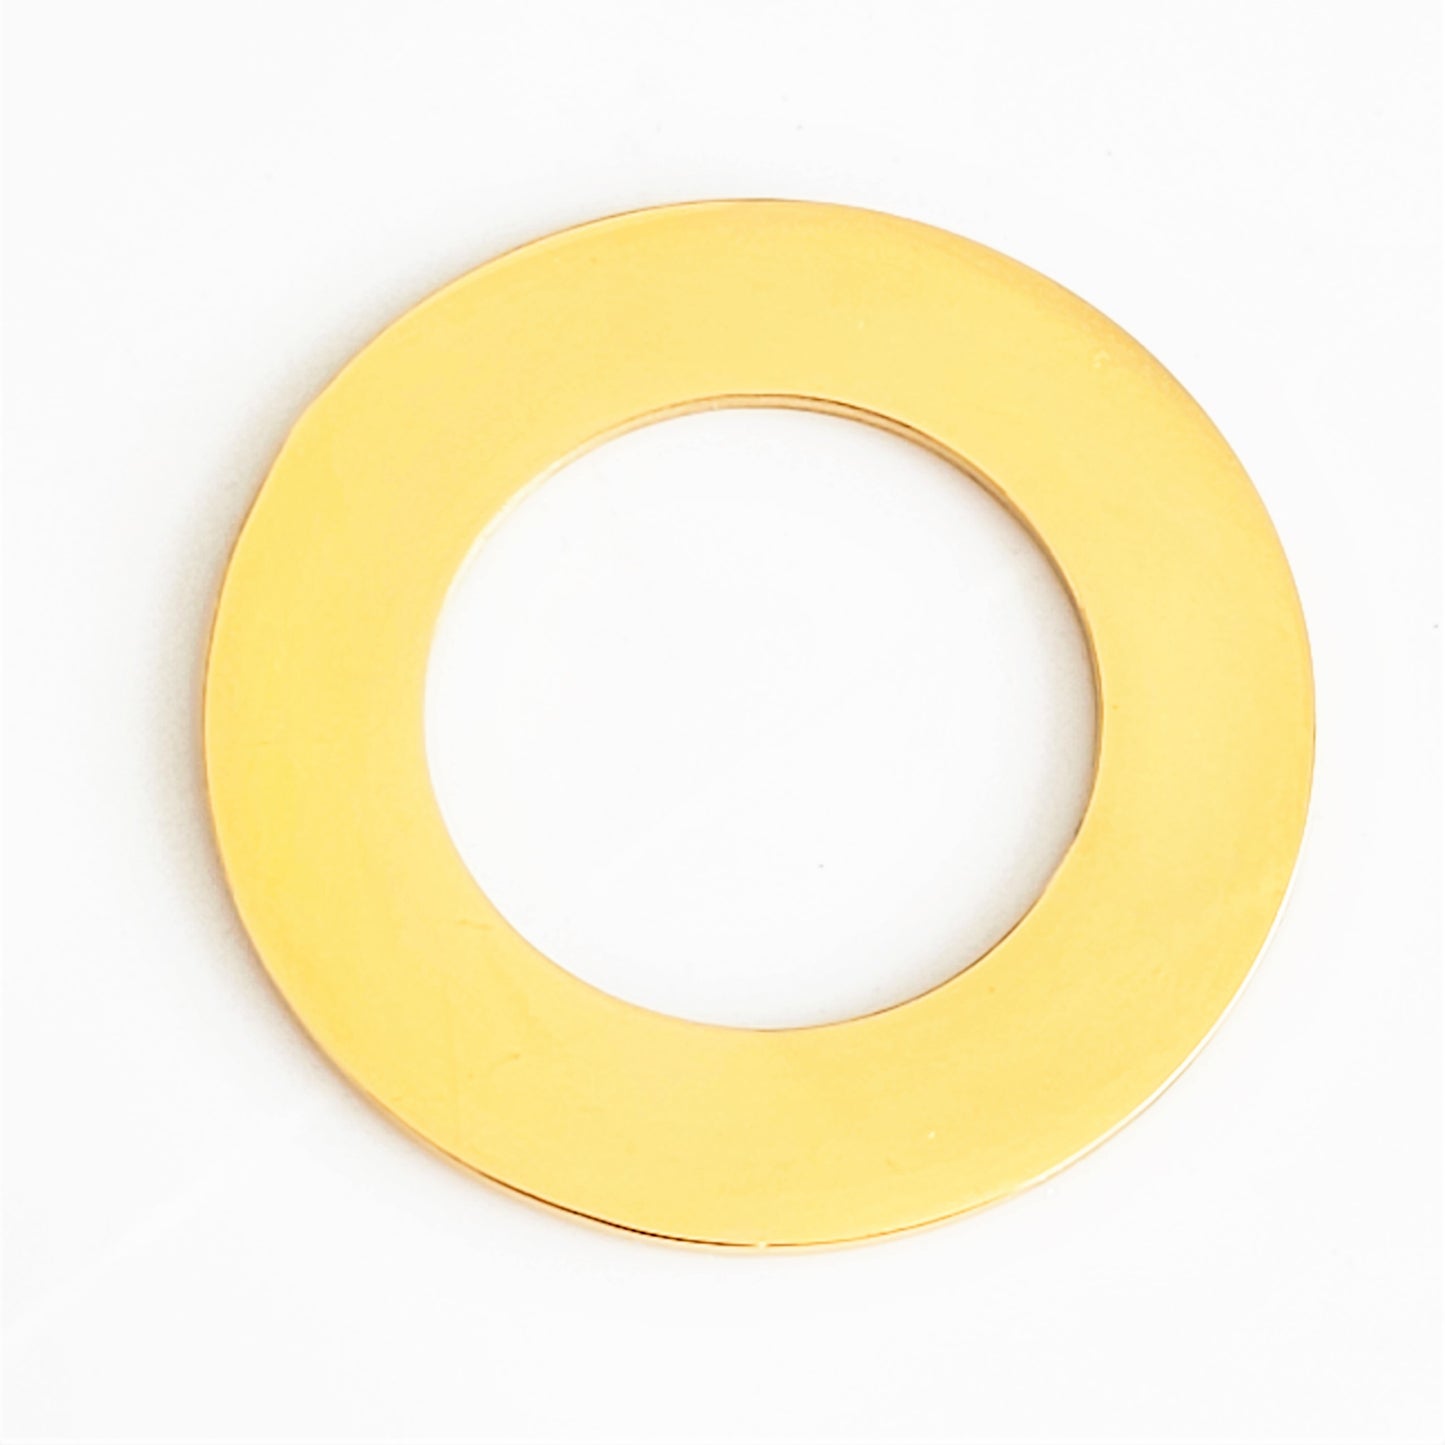 Gold Plated Stainless Steel - 1 1/2" Washer (no hole)